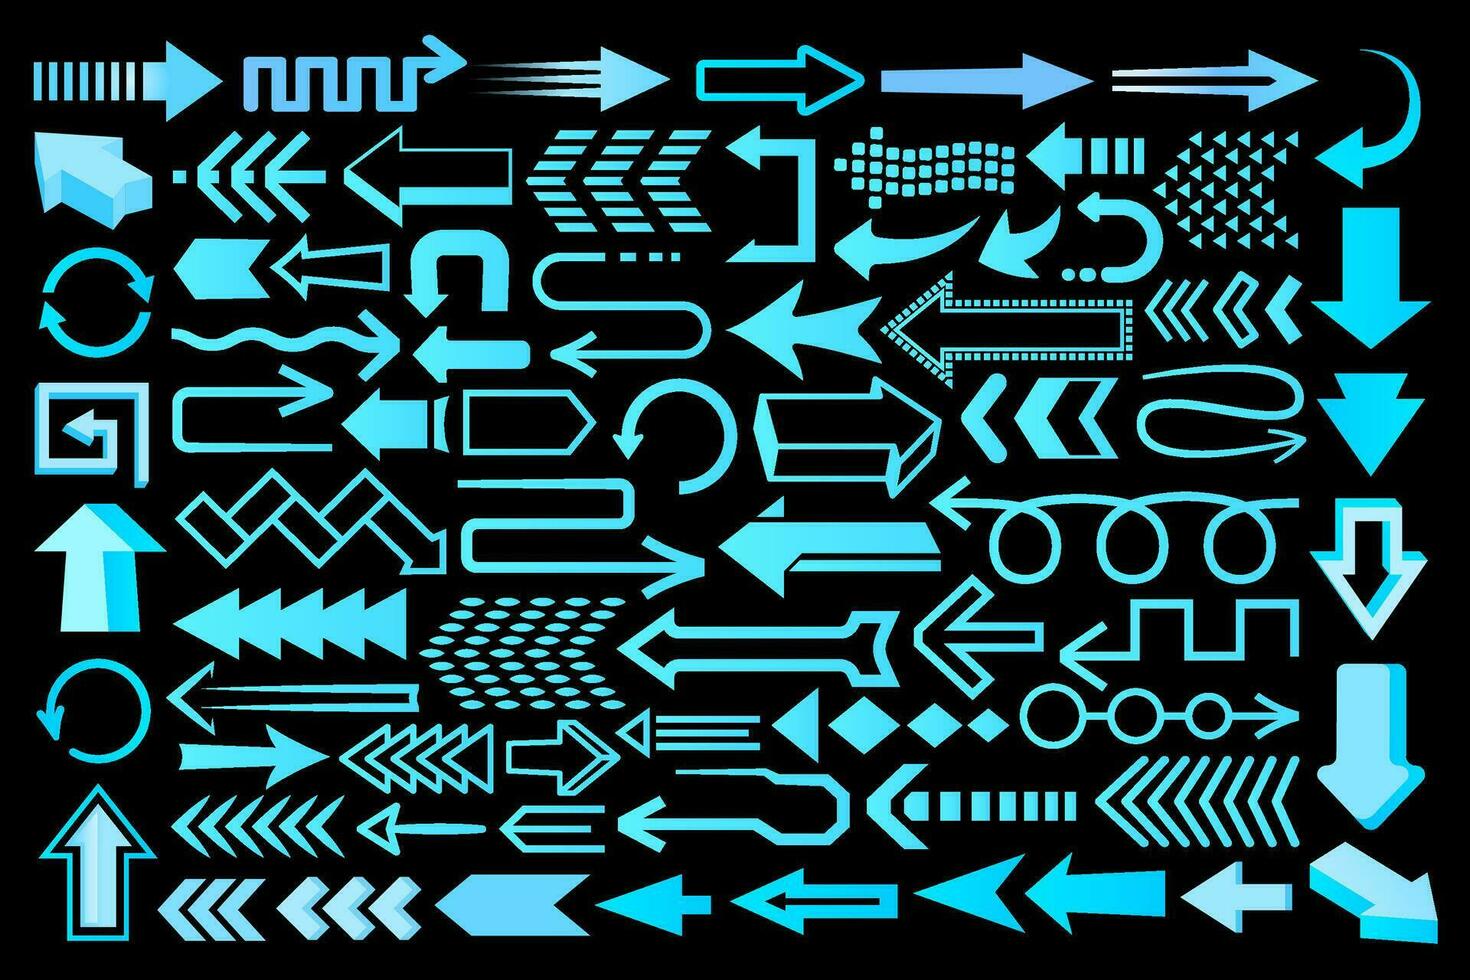 High tech arrow set. Collection of blue arrows for technological, futuristic, scientific designs. Pointer, cursor, navigational and directional arrow icons. vector